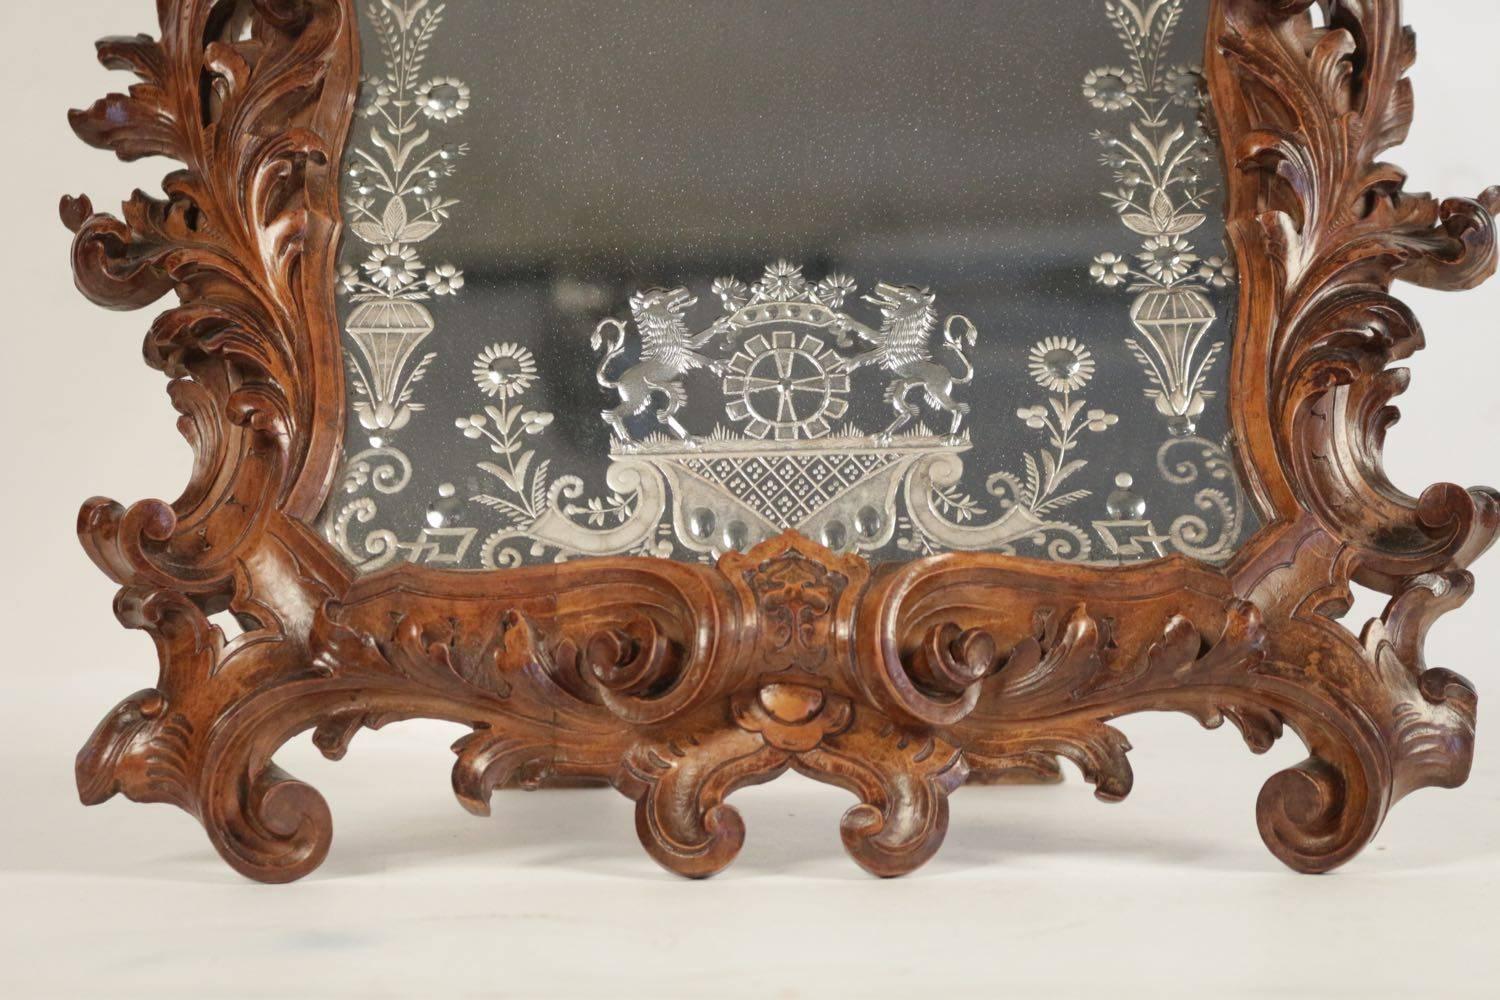 European Mirror with Geometrics Motifs Surrounded by a Frame Beautifully Detailed